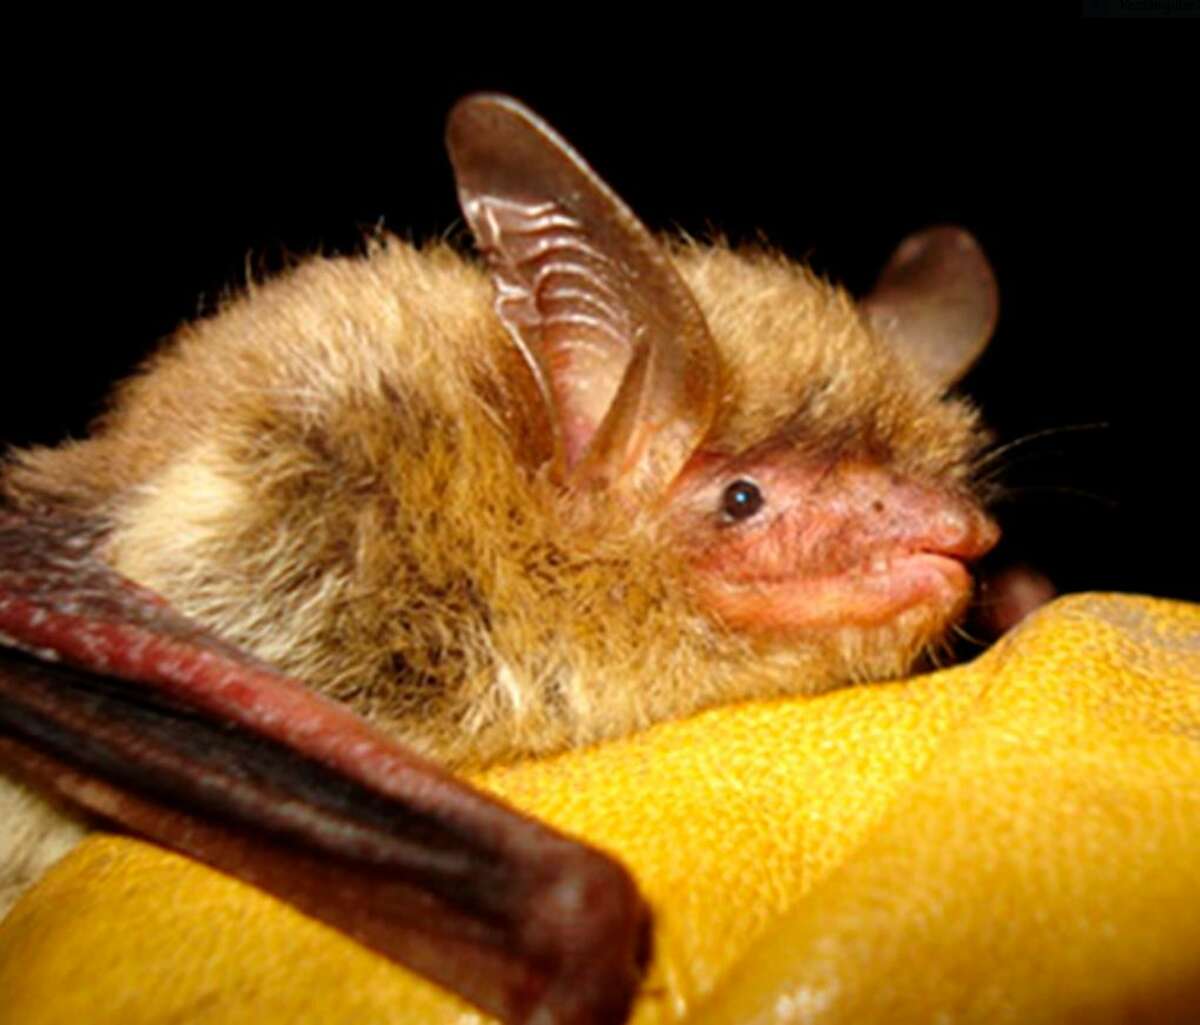 Northern long-eared bats are now on the endangered species list. The fungus that is plaguing them was first discovered near Albany.